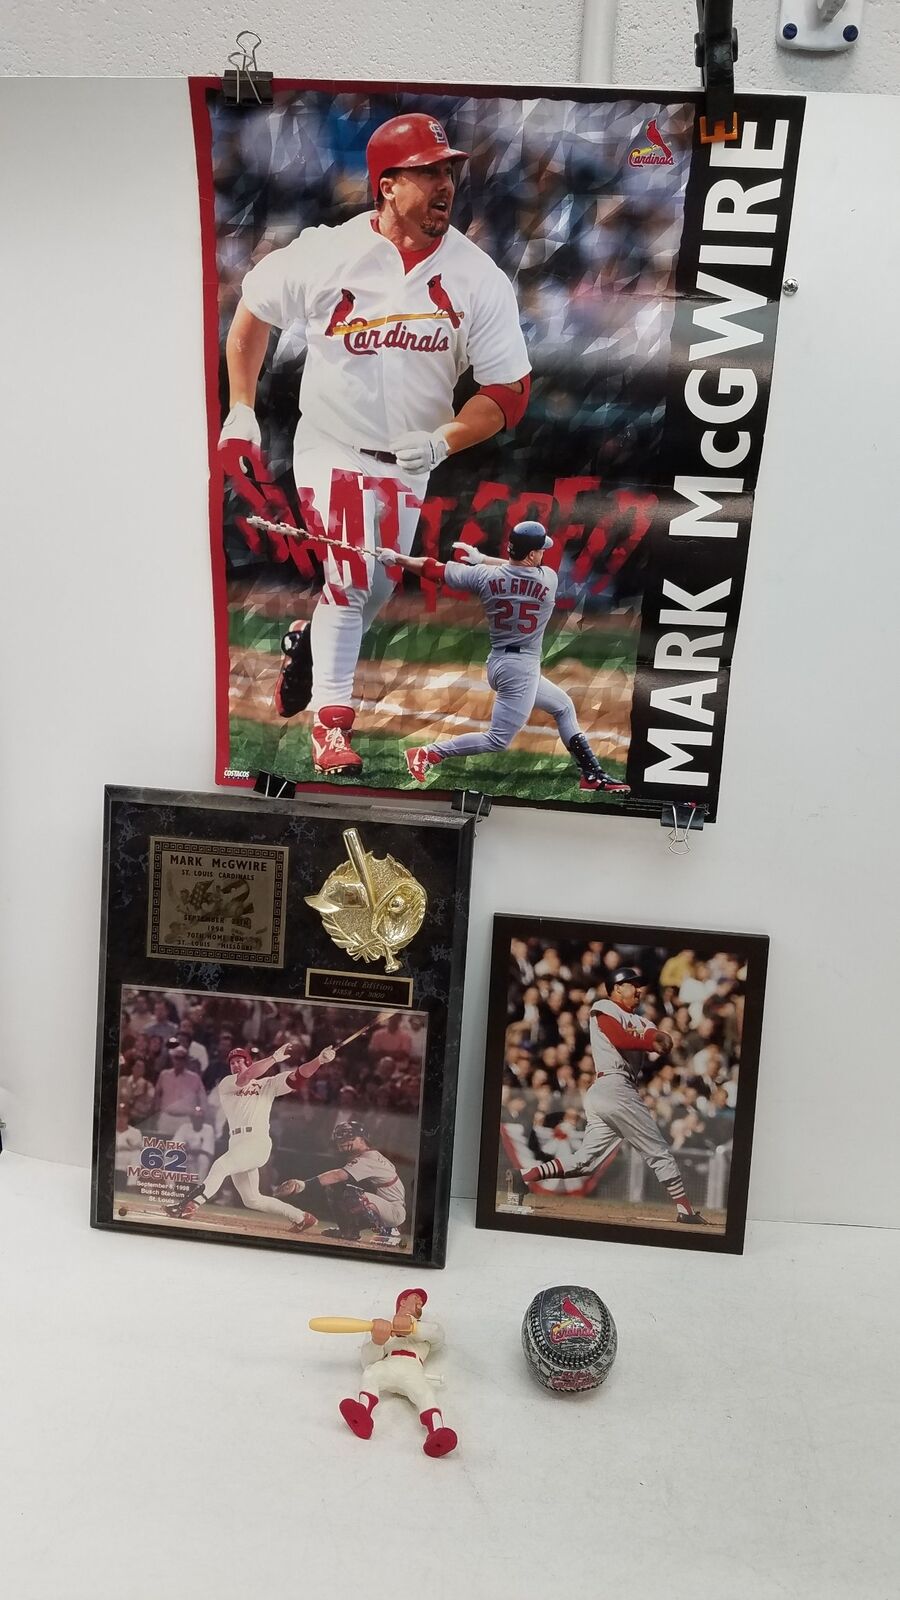 St. Louis Cardinals Bundle - Stan Musial Picture, Team Ball, Mark McGwire Items